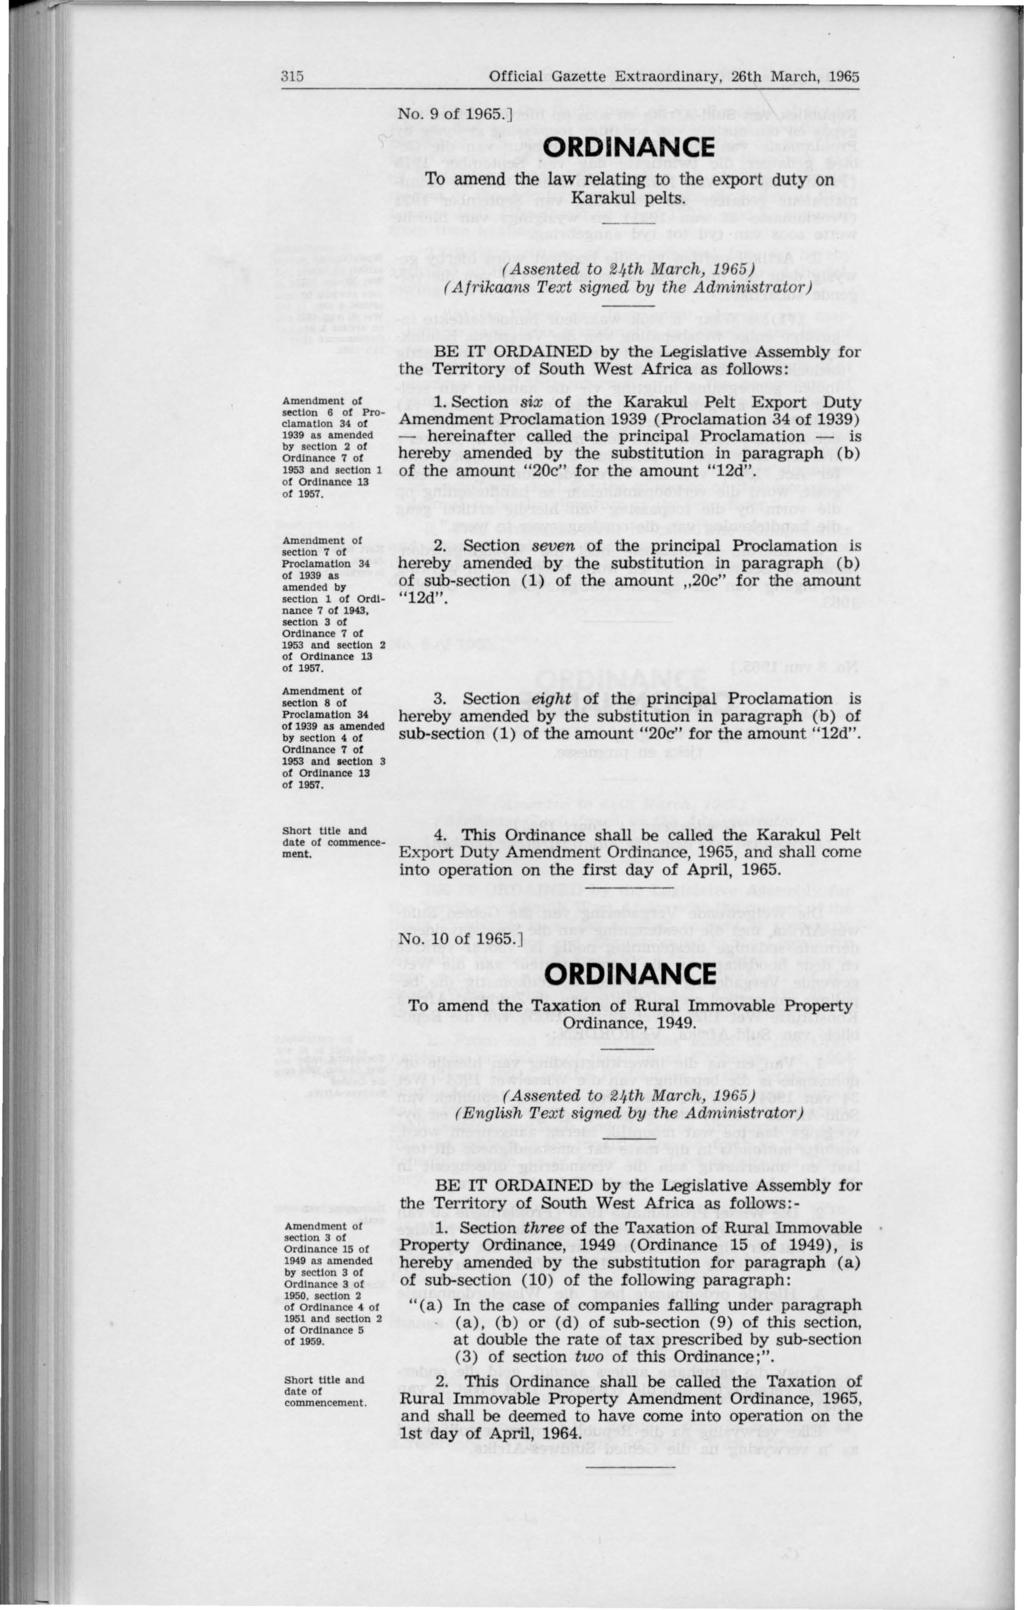 315 Official Gazette Extraor.dinary, 26th March, 1965 No. 9 of 1965.] ORDINANCE To amend the law relating to the export duty on Karakul pelts. (Assented to 24th March, 1965) ( Af?